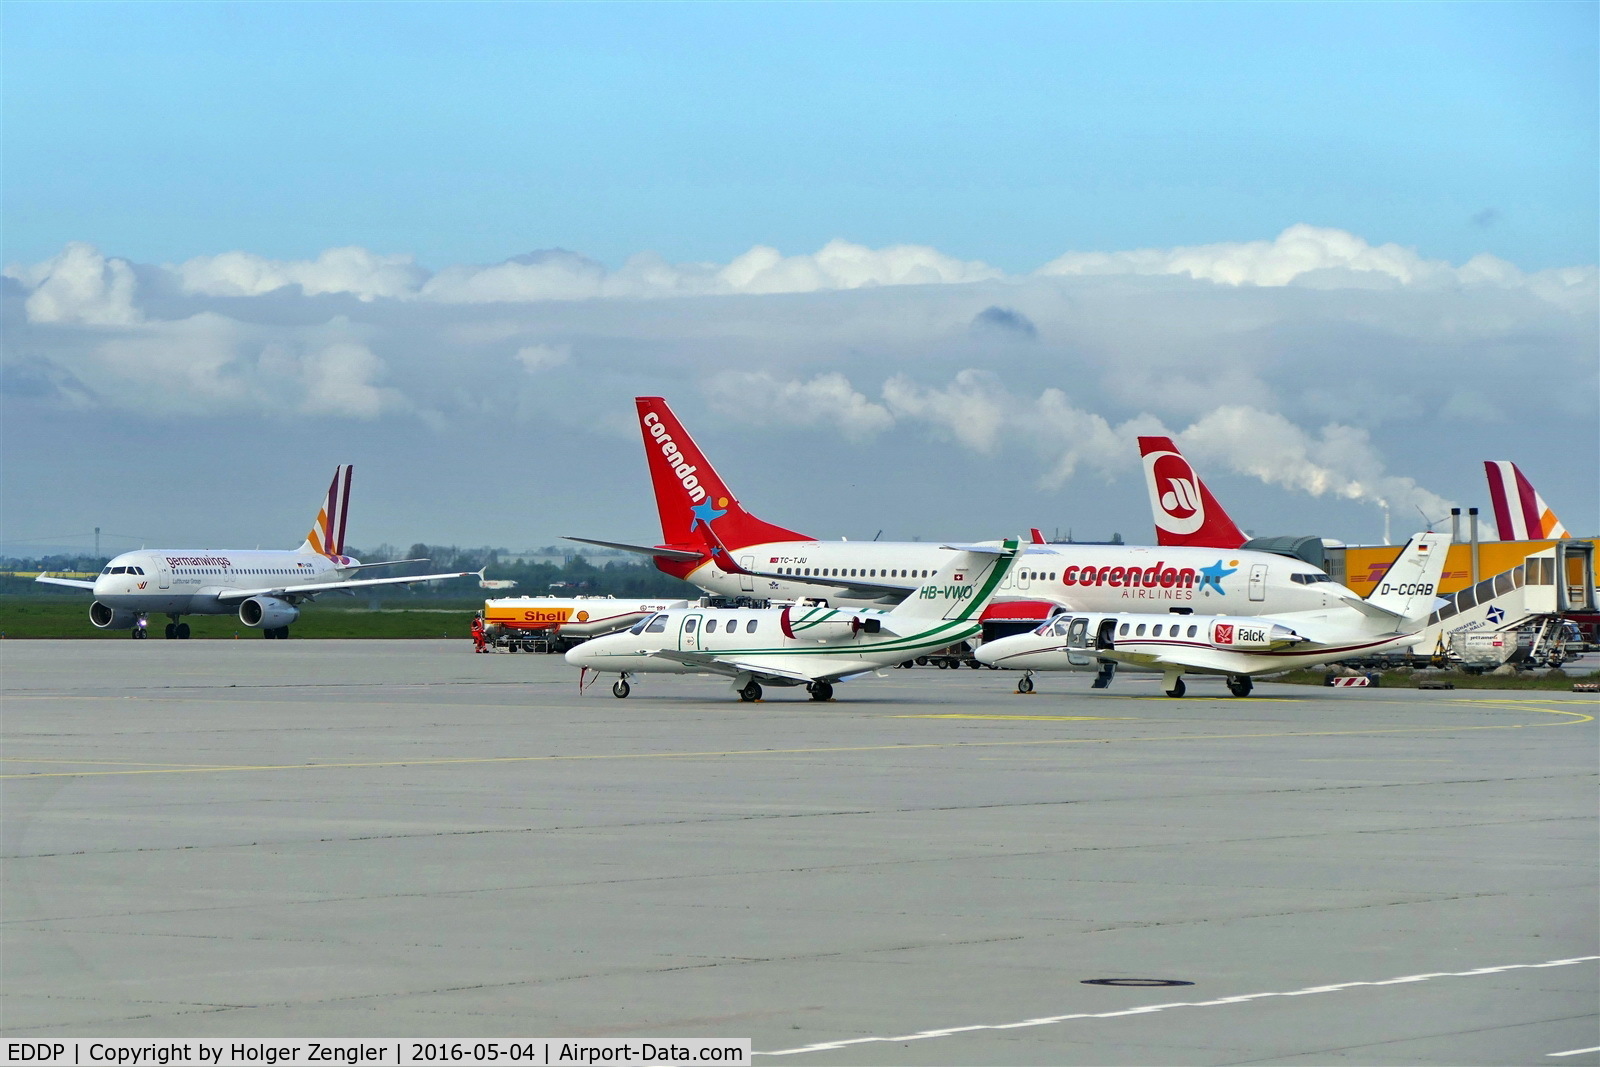 Leipzig/Halle Airport, Leipzig/Halle Germany (EDDP) - The crowded hour on apron 1....